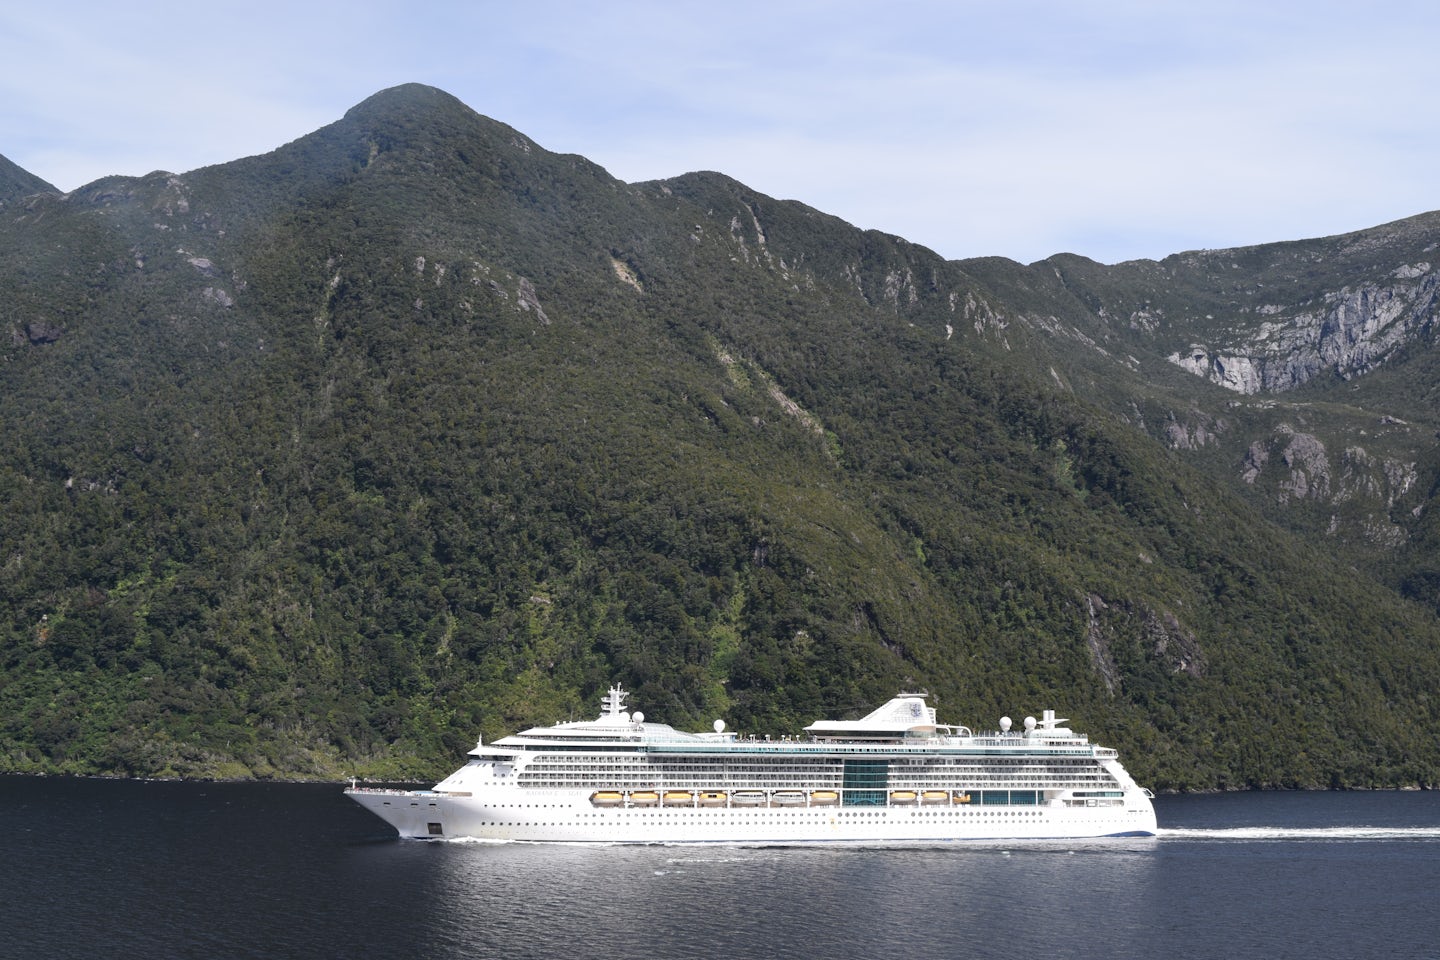 Passing Radiance of the Seas in Doubtful sound, Fiordland NZ.